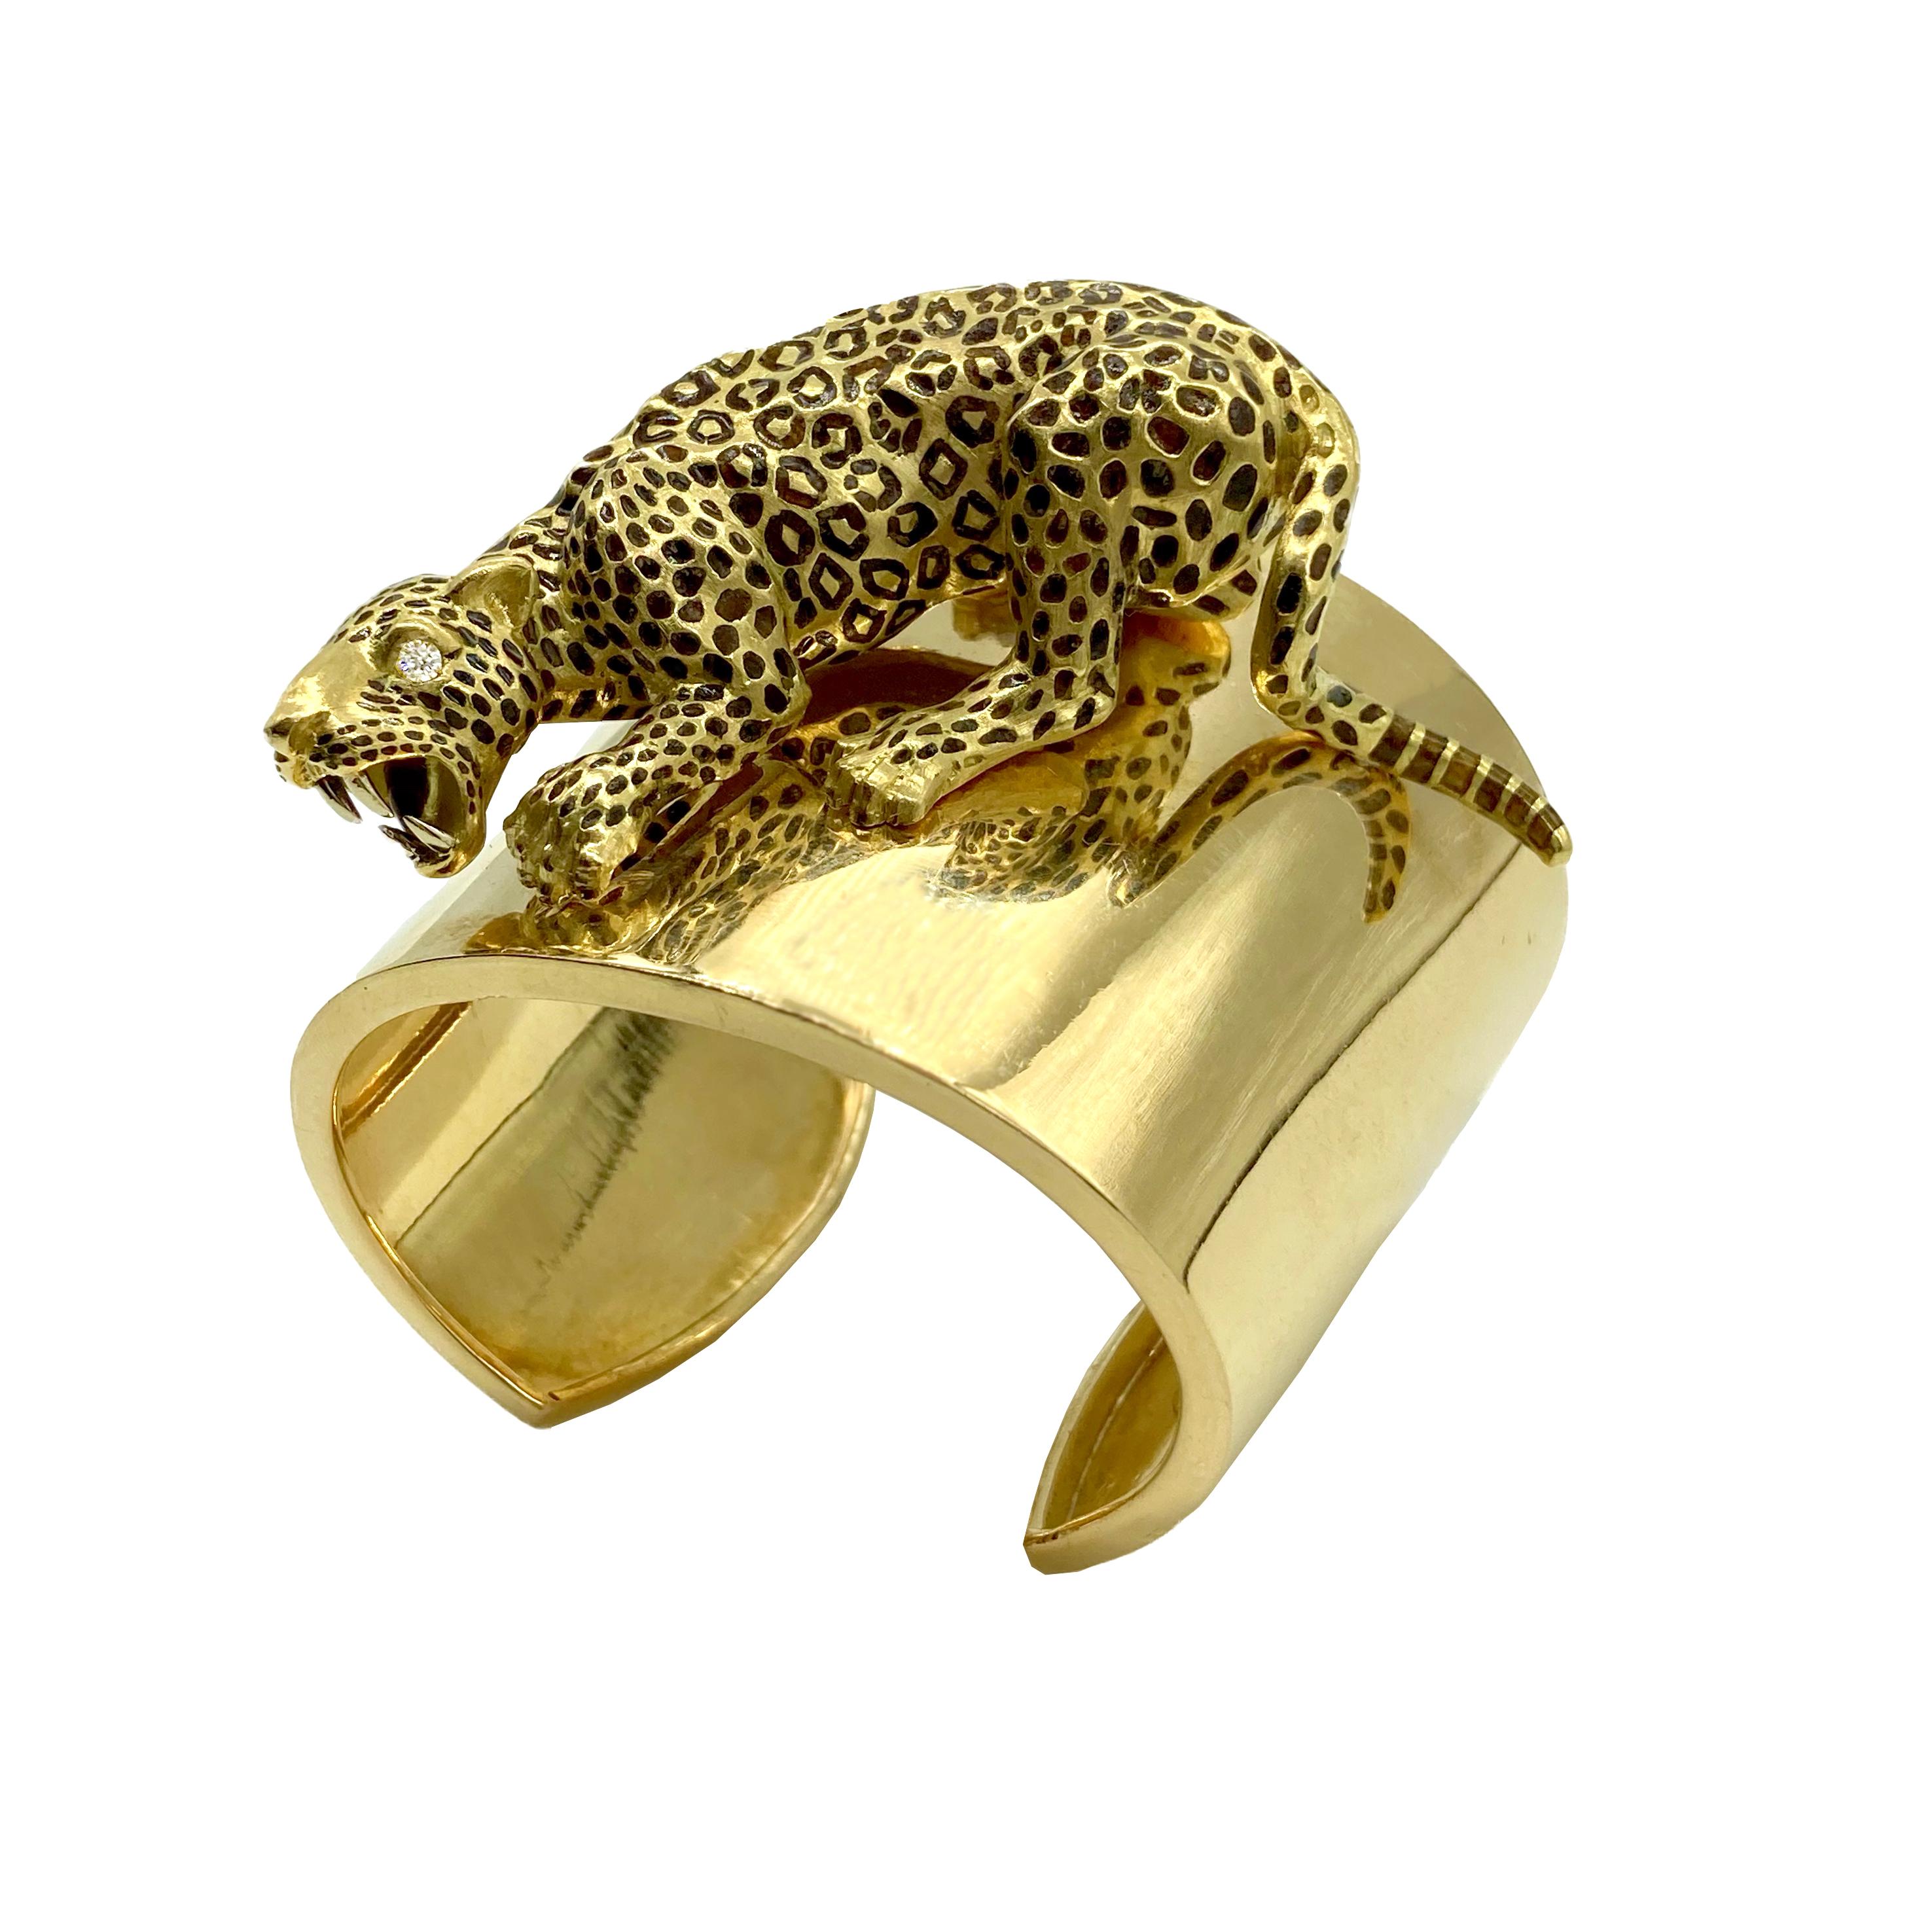 A chic yellow gold statement cuff bracelet featuring a large panther with diamond eyes. 